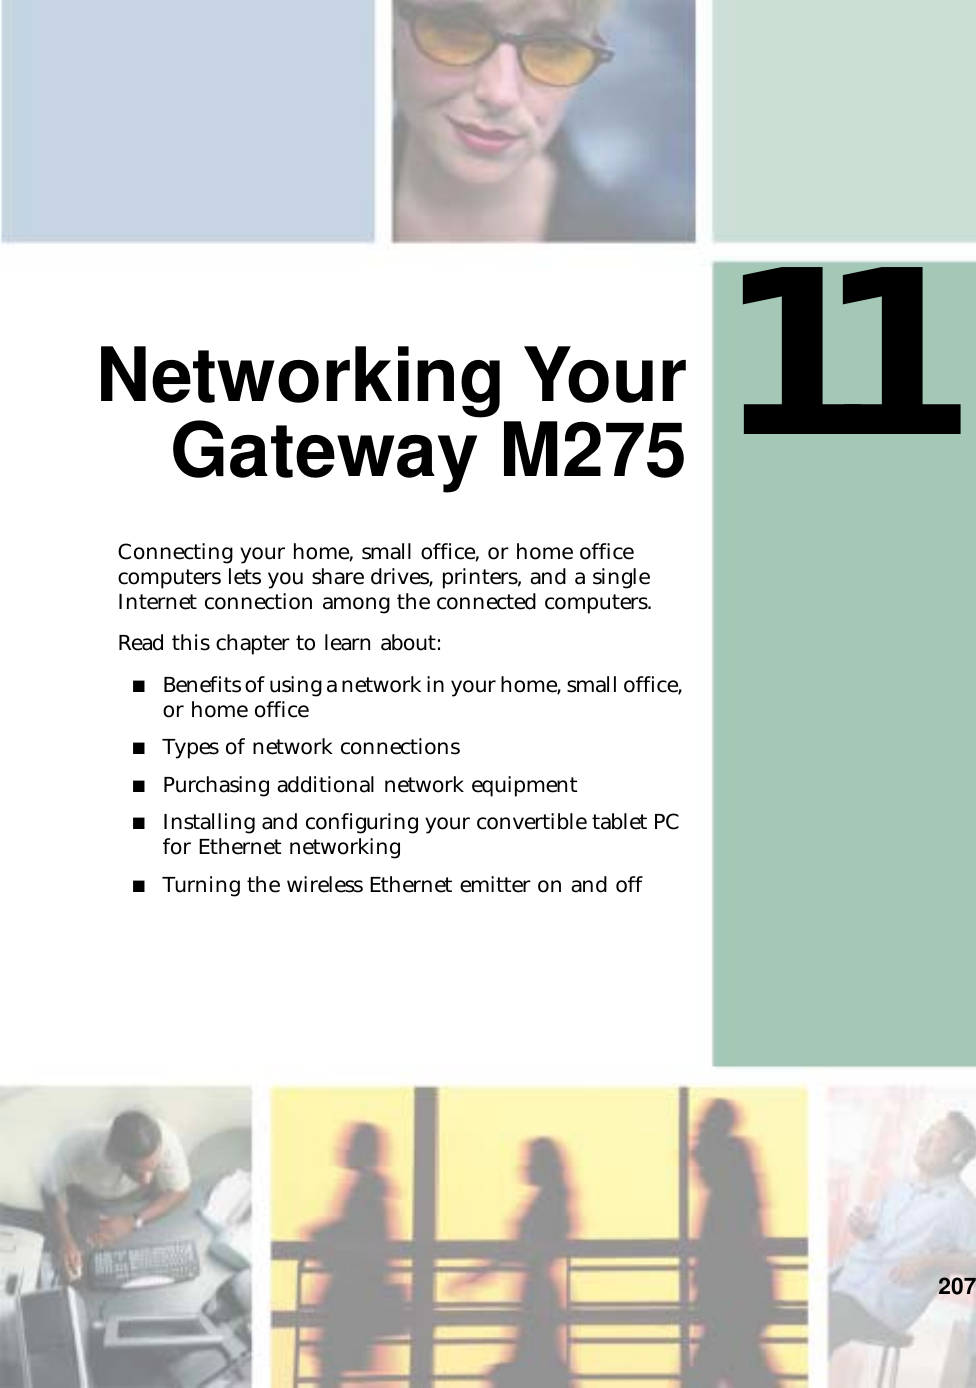 11207Networking YourGateway M275Connecting your home, small office, or home office computers lets you share drives, printers, and a single Internet connection among the connected computers.Read this chapter to learn about:■Benefits of using a network in your home, small office, or home office■Types of network connections■Purchasing additional network equipment■Installing and configuring your convertible tablet PC for Ethernet networking■Turning the wireless Ethernet emitter on and off